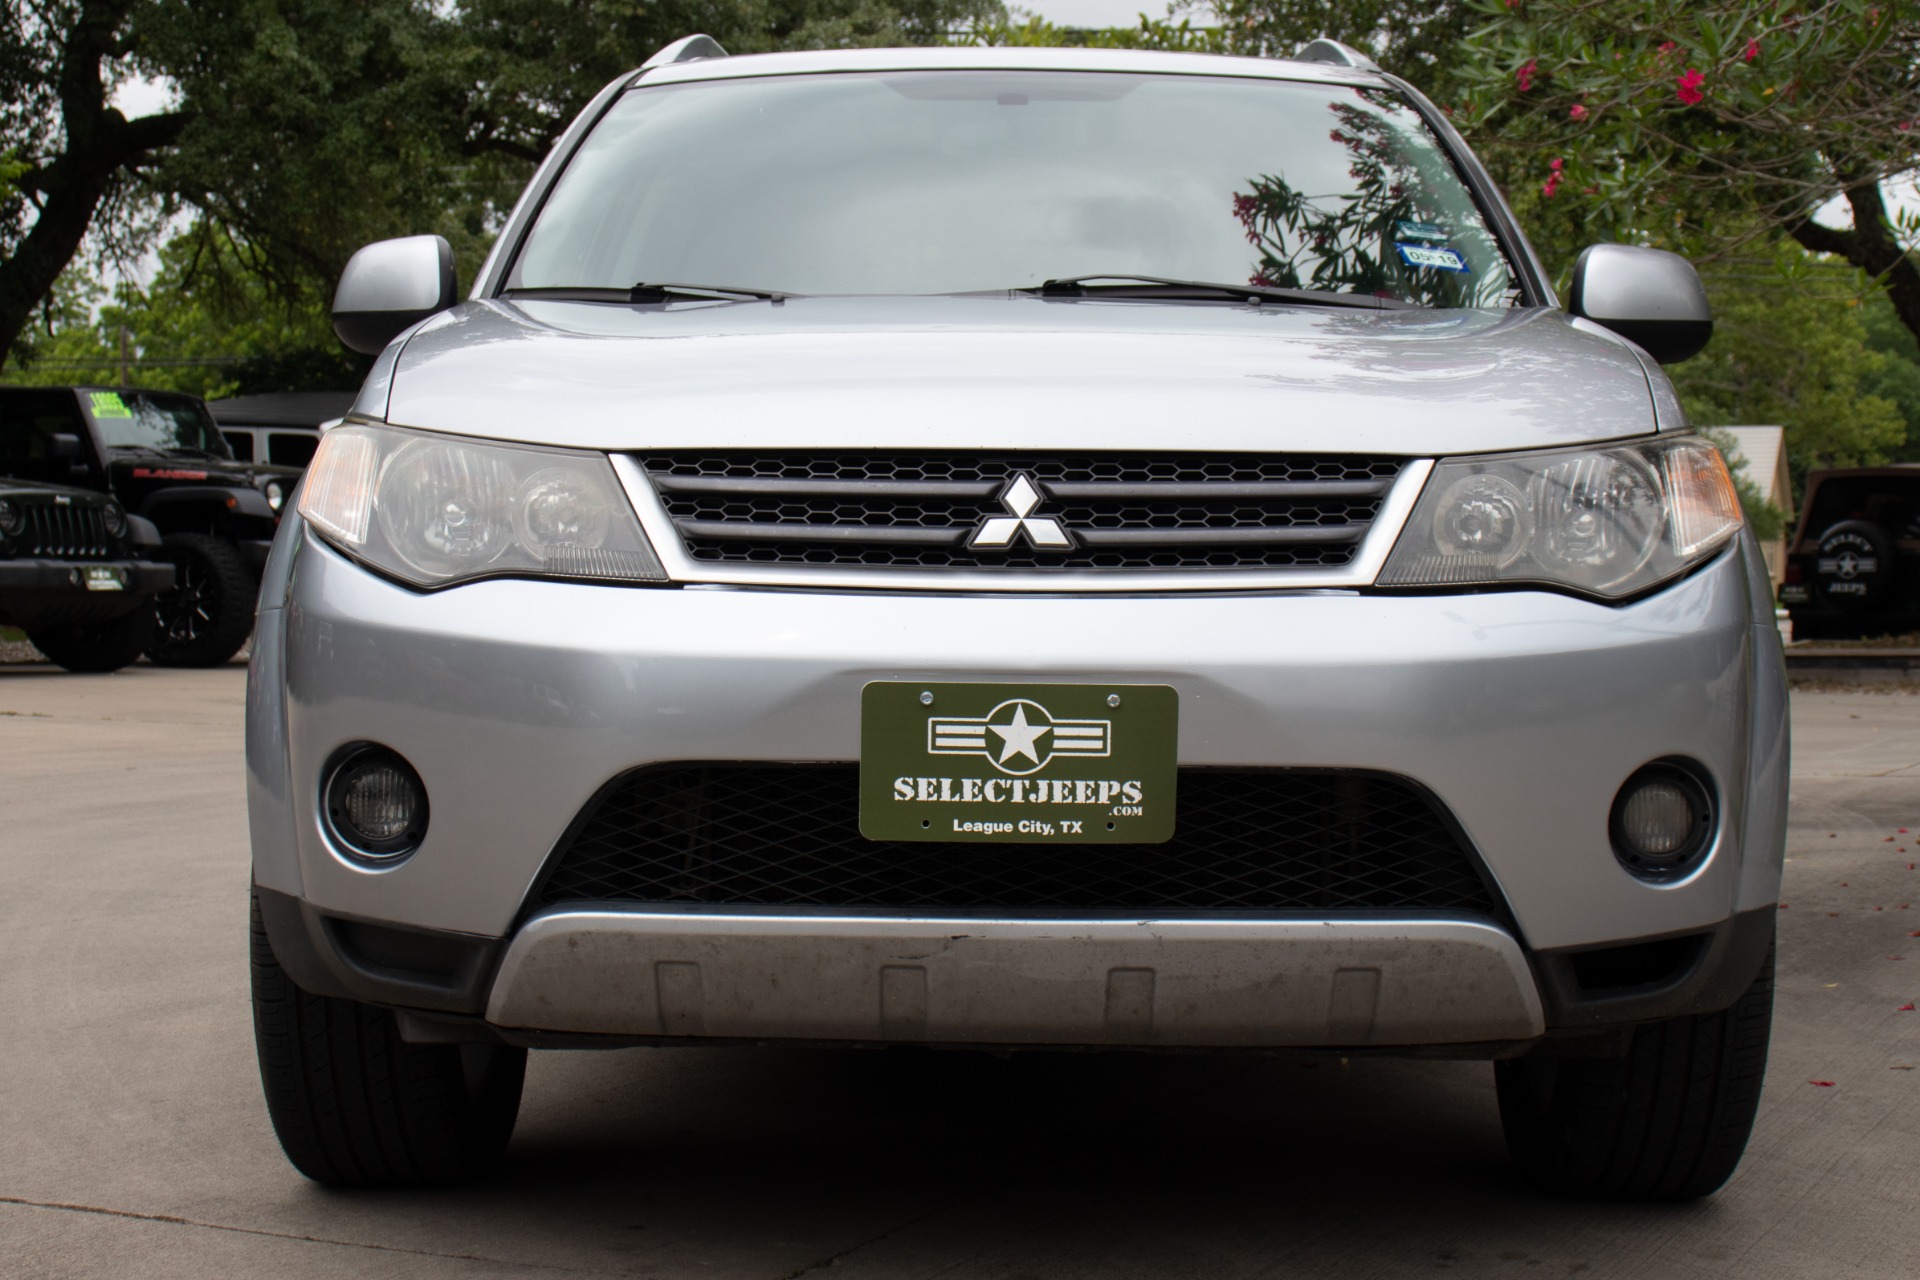 Used 2008 Mitsubishi Outlander XLS For Sale ($6,995) | Select Jeeps Inc ...